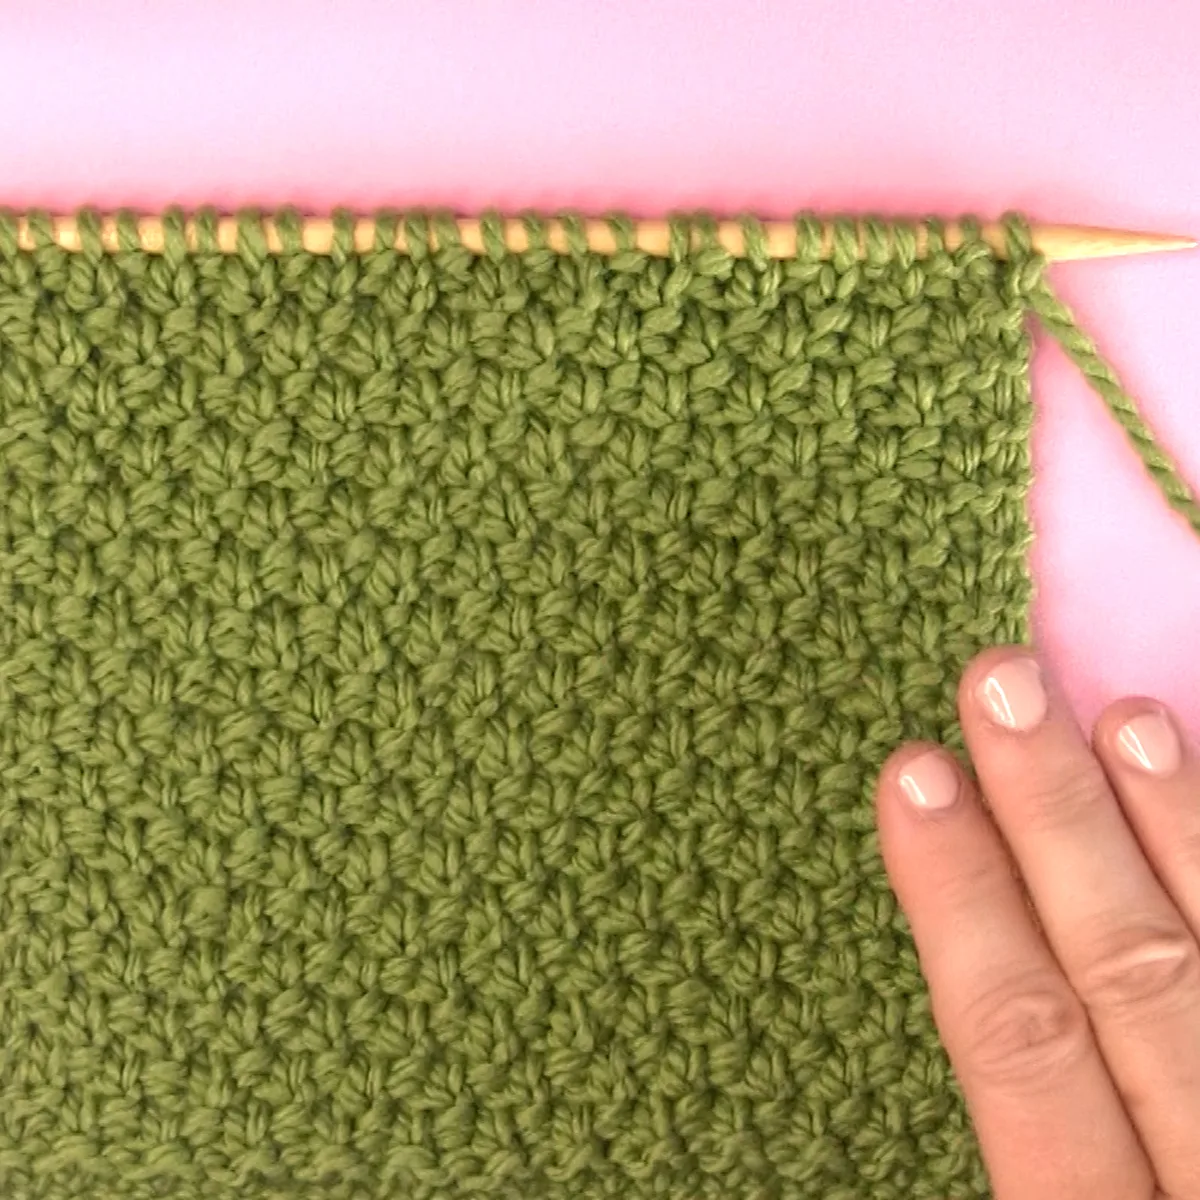 Irish Moss Knit Stitch pattern on knitting needle in green color yarn with woman's hand.